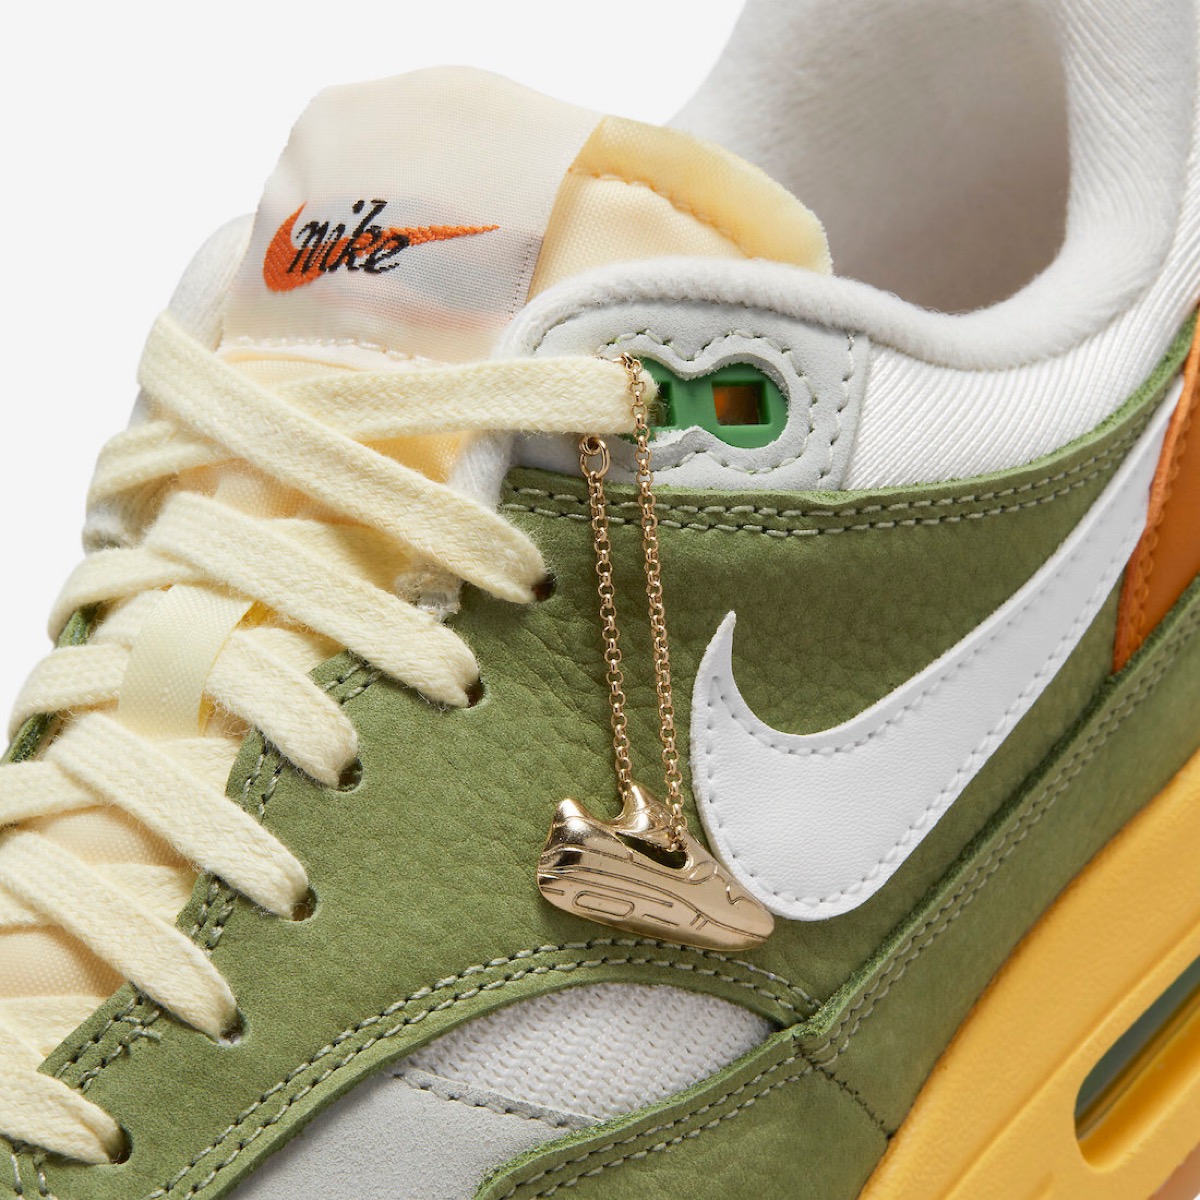 Design by Japanで誕生したNike Wmns Air Max 1 PRM “Think Tank”が ...